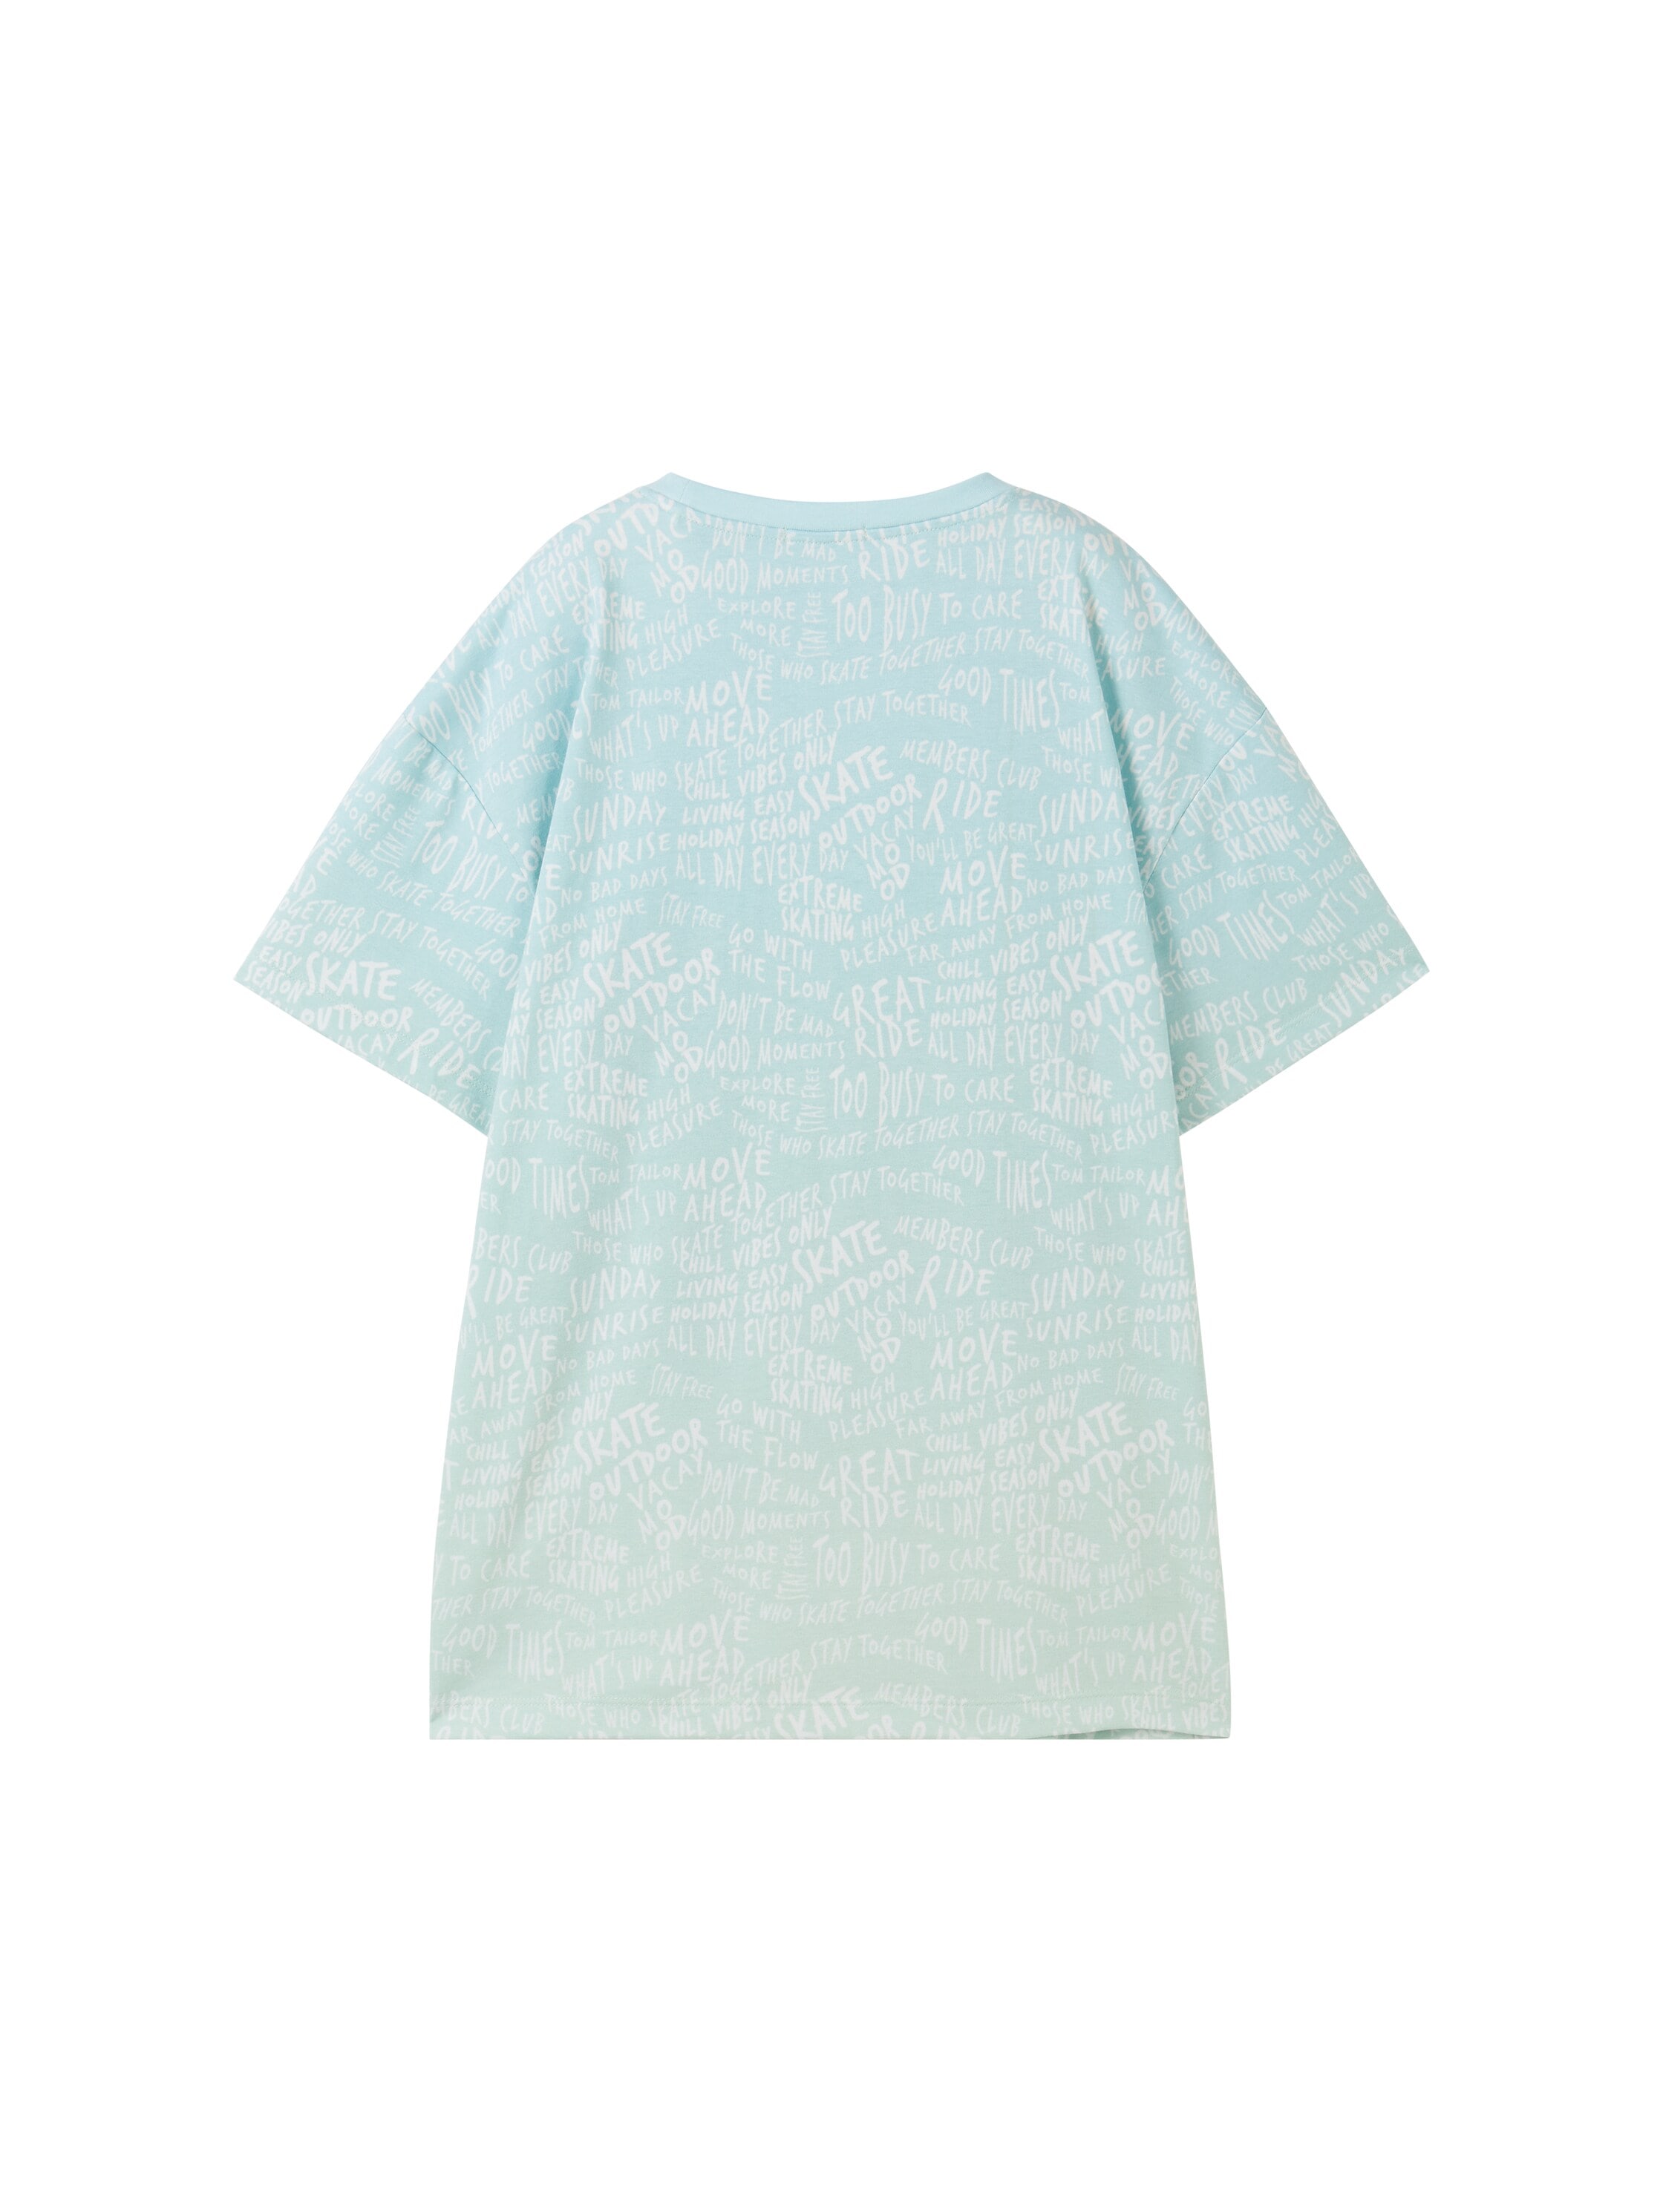 TOM TAILOR T-Shirt, mit All-over Print